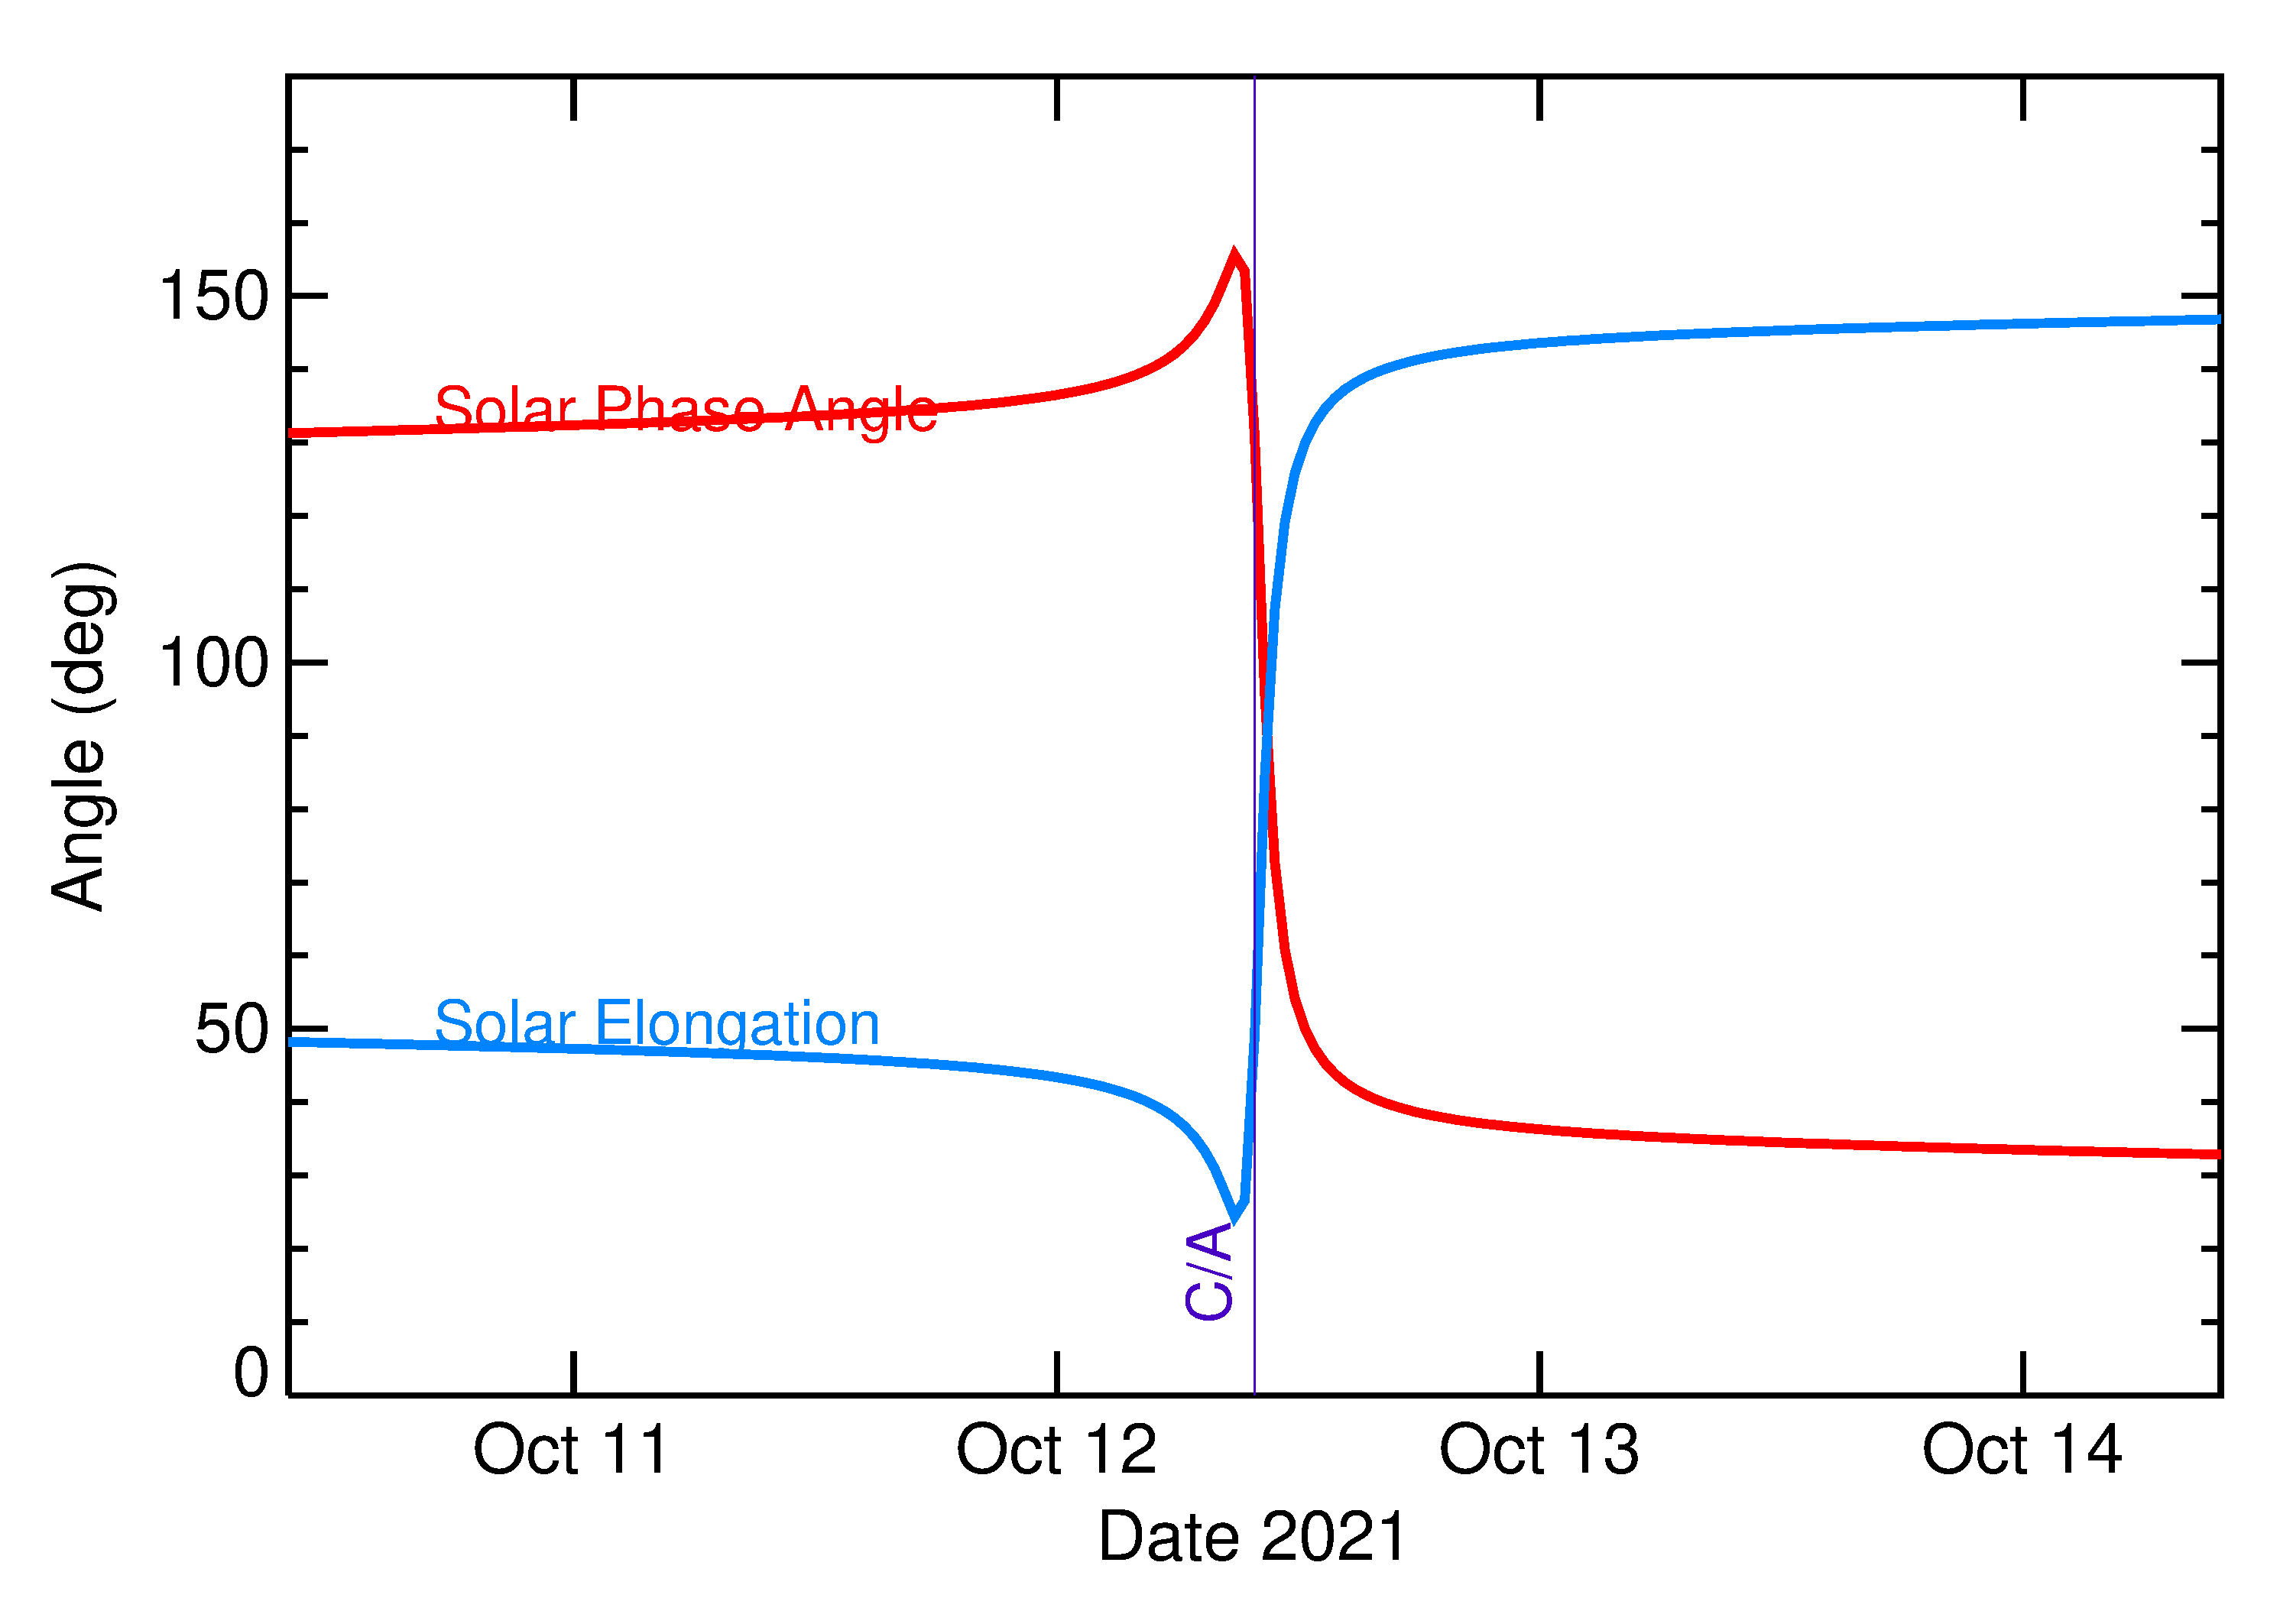 Solar Elongation and Solar Phase Angle of 2021 TE13 in the days around closest approach